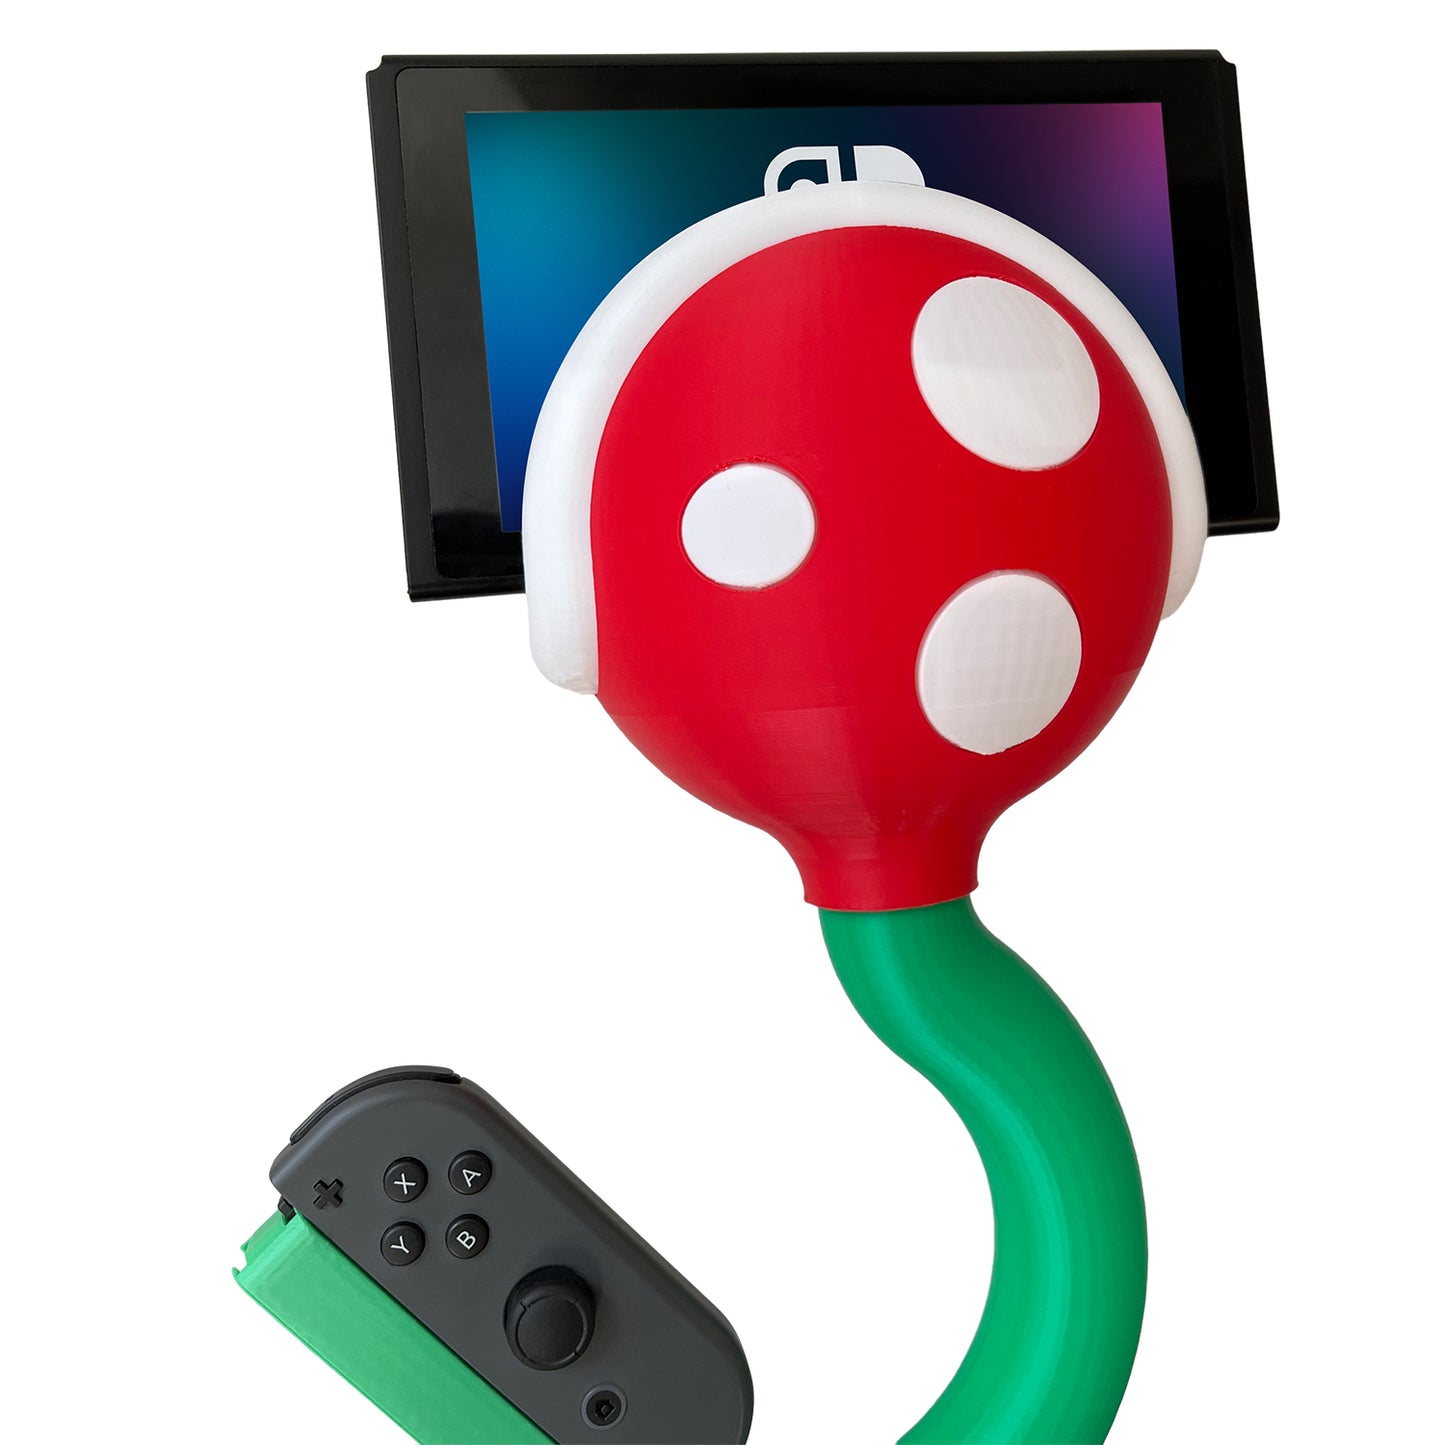 3D Printed Holder of Chomper Plants vs. Zombies, for Nintendo Switch Handheld, Easy Assembly with Super Glue